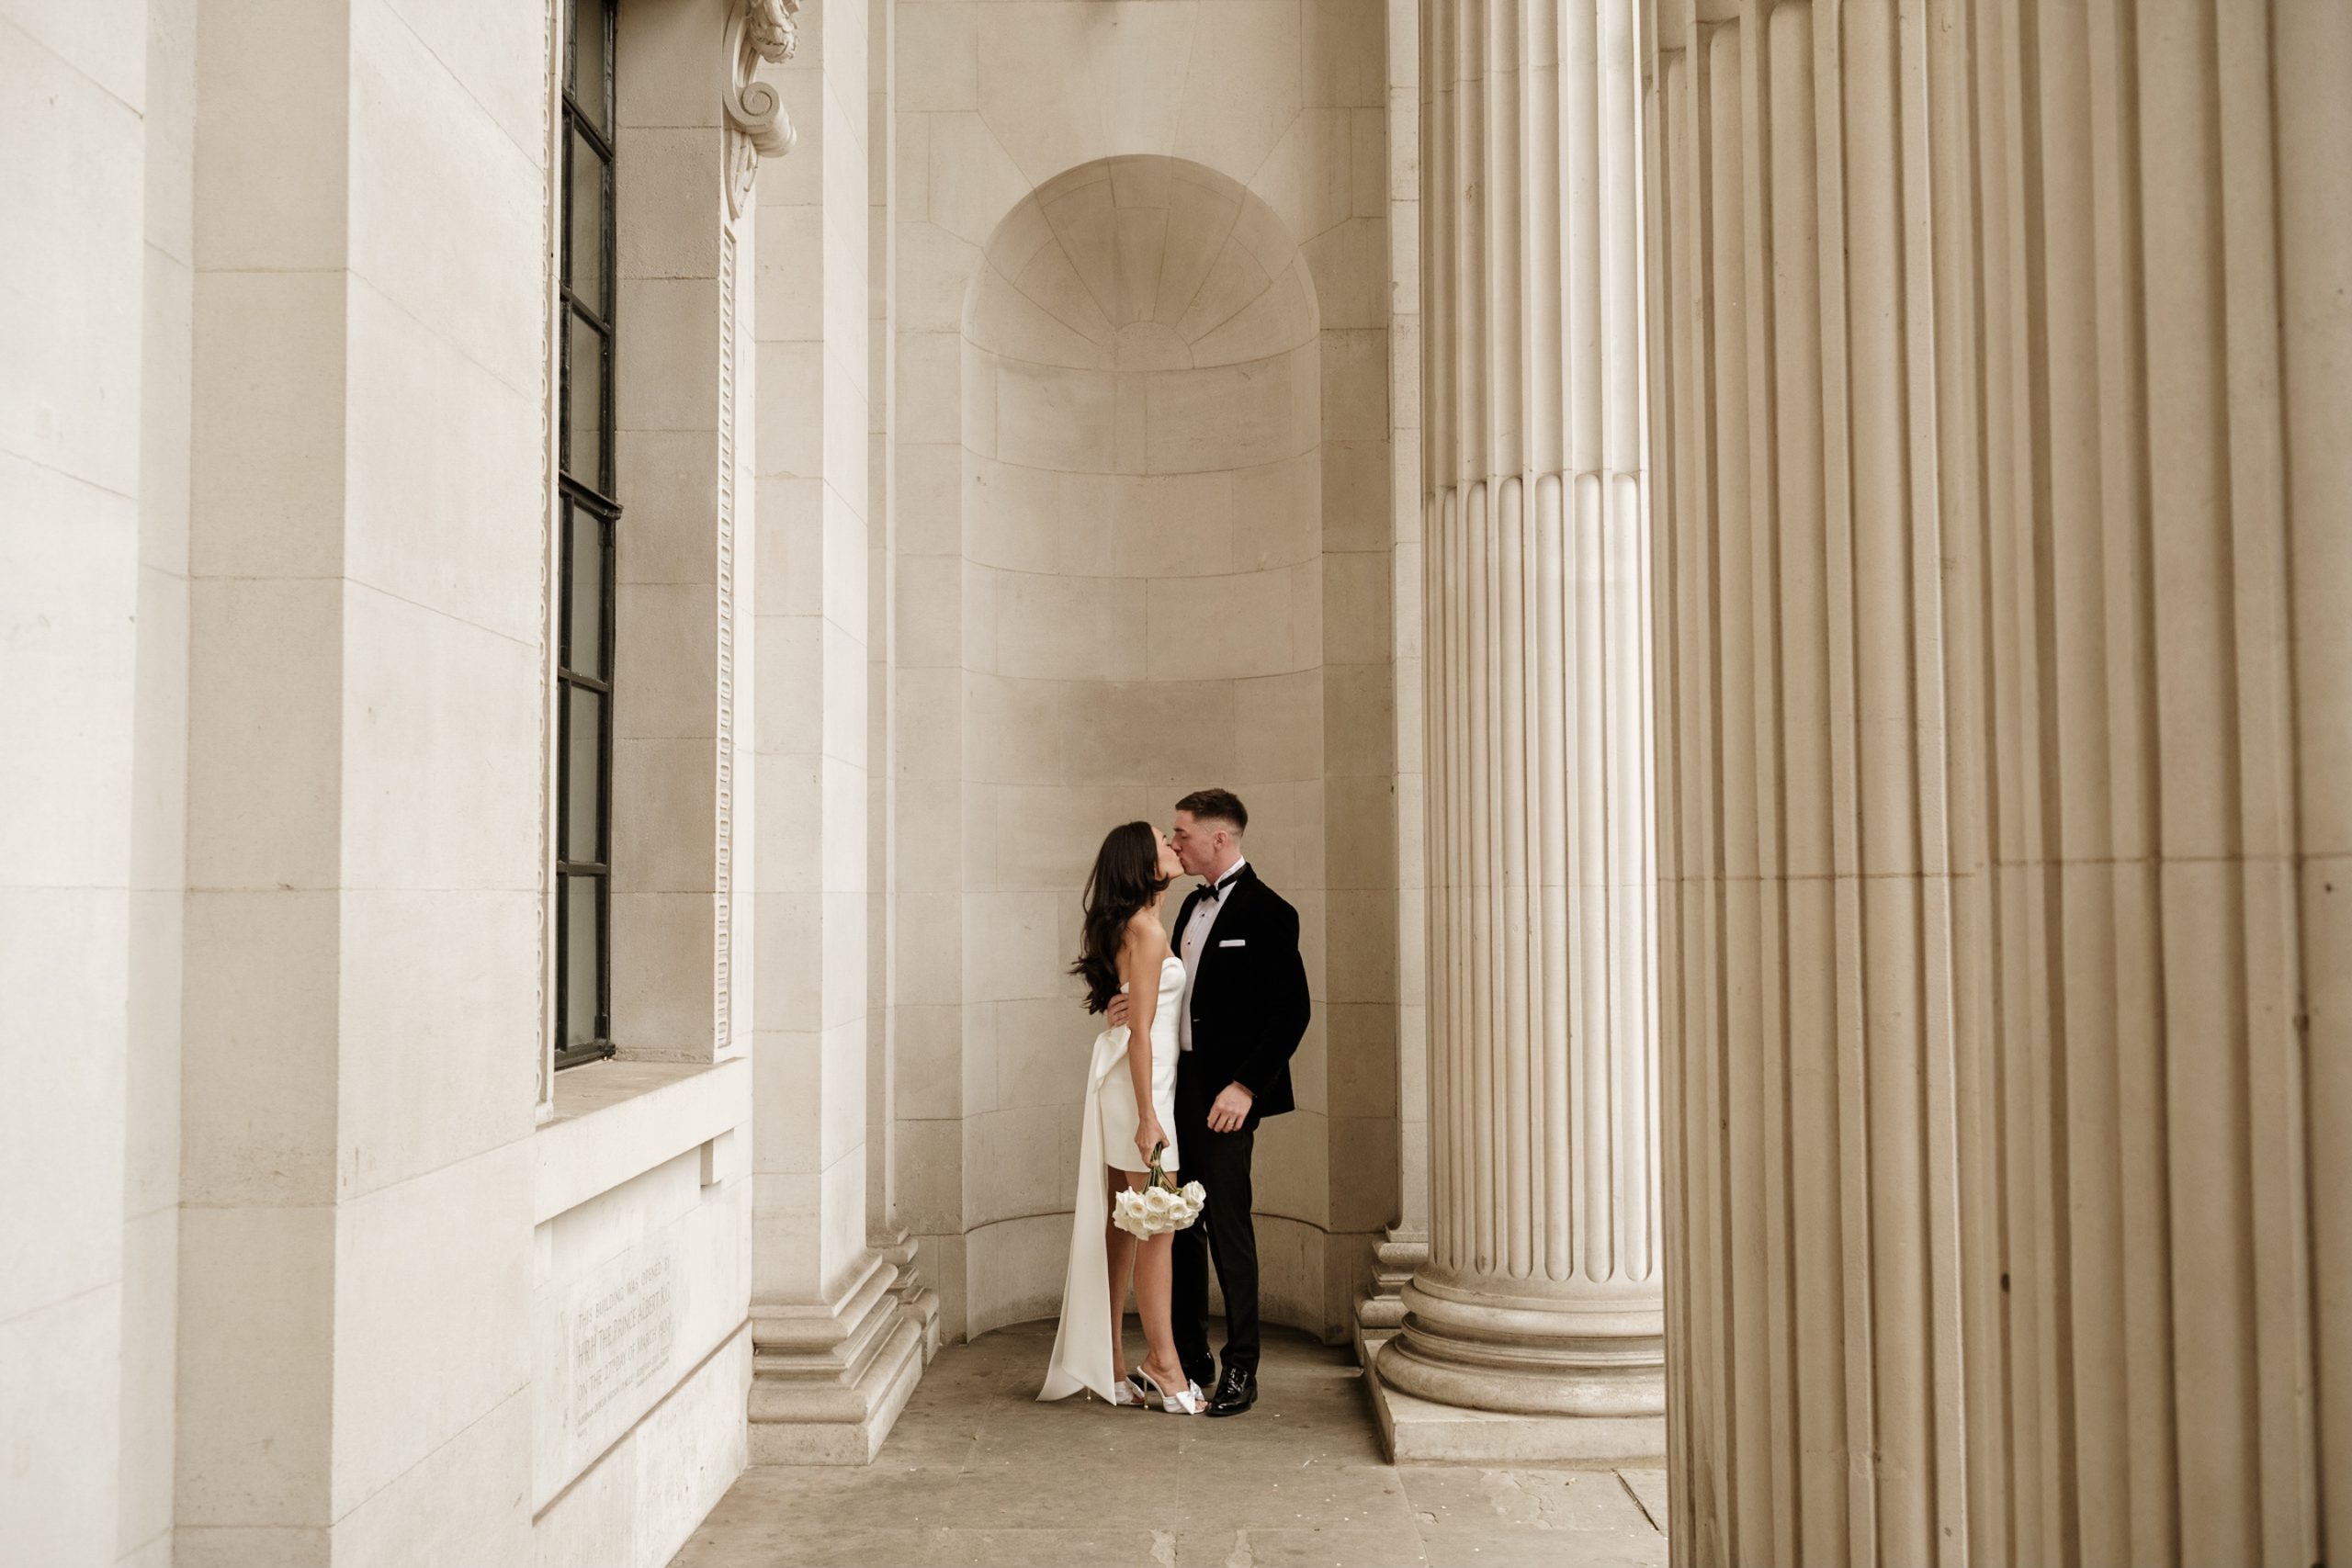 Bride and groom kissing in the arches of the iconic Old Marylebone town hall in central London